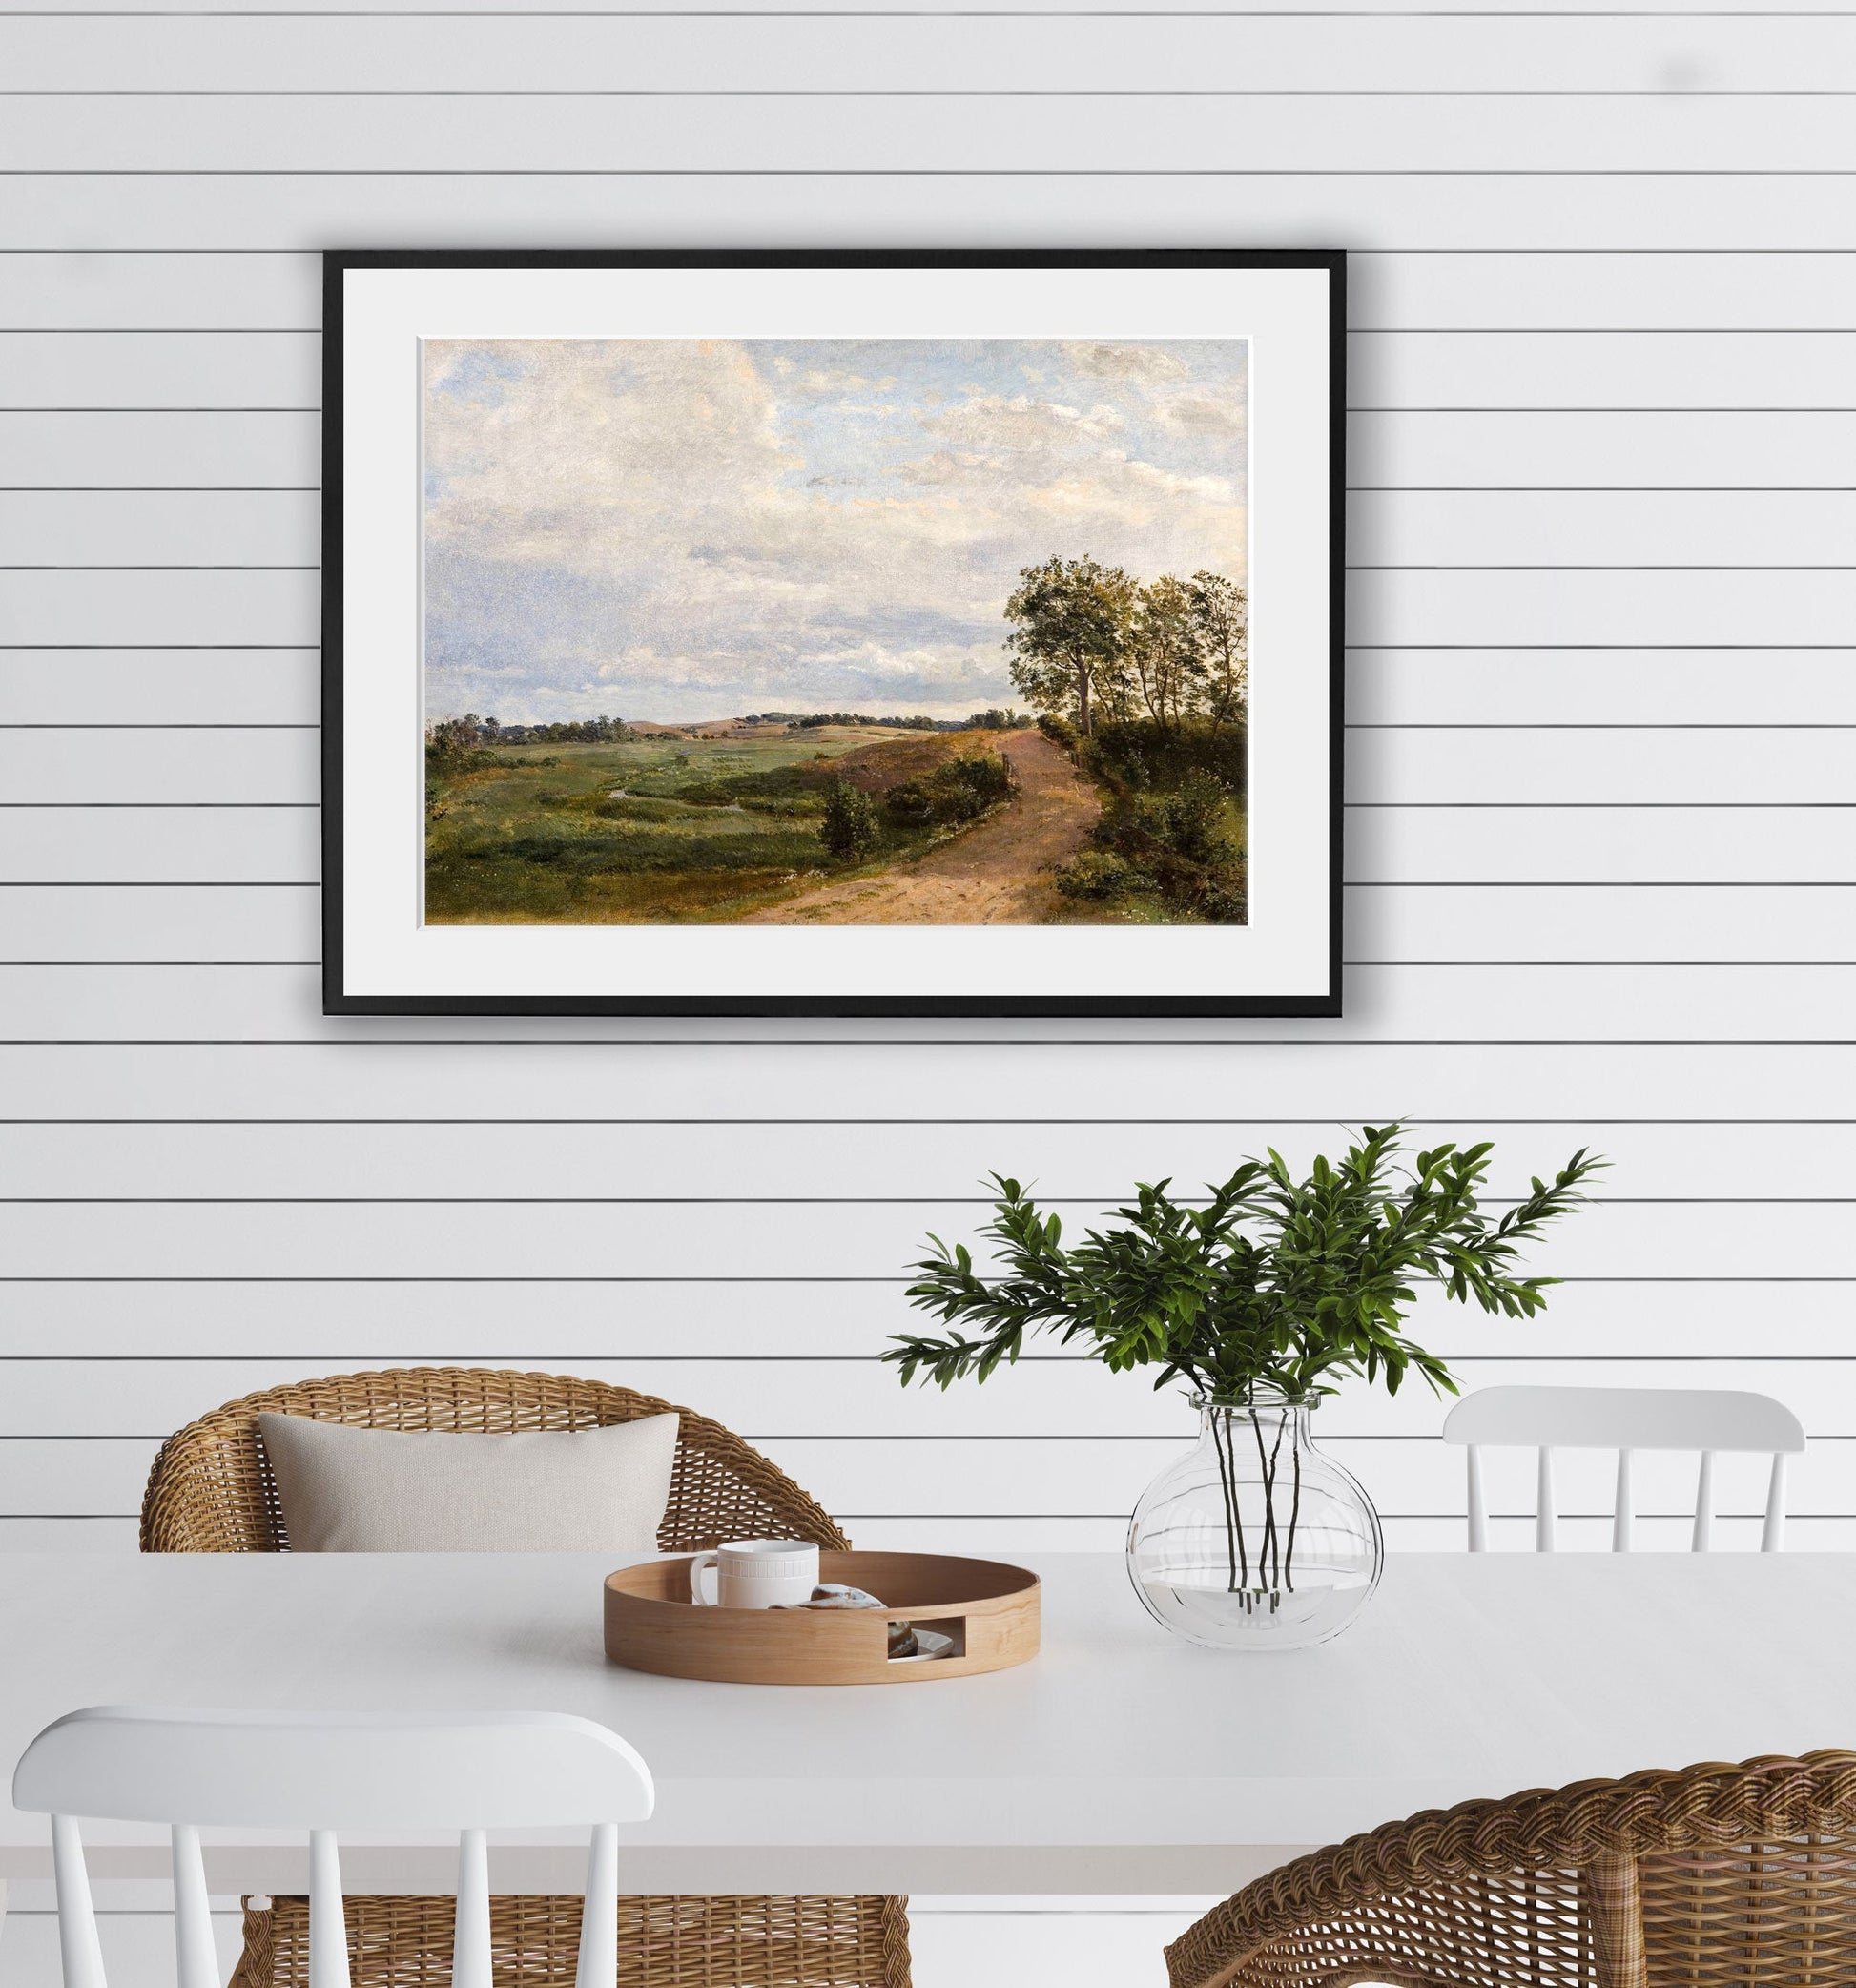 Dirt Road Landscape Vintage Artwork - Old Painting Farmhouse Kitchen Living Room Decor Picture - Printed and Shipped Reproduction